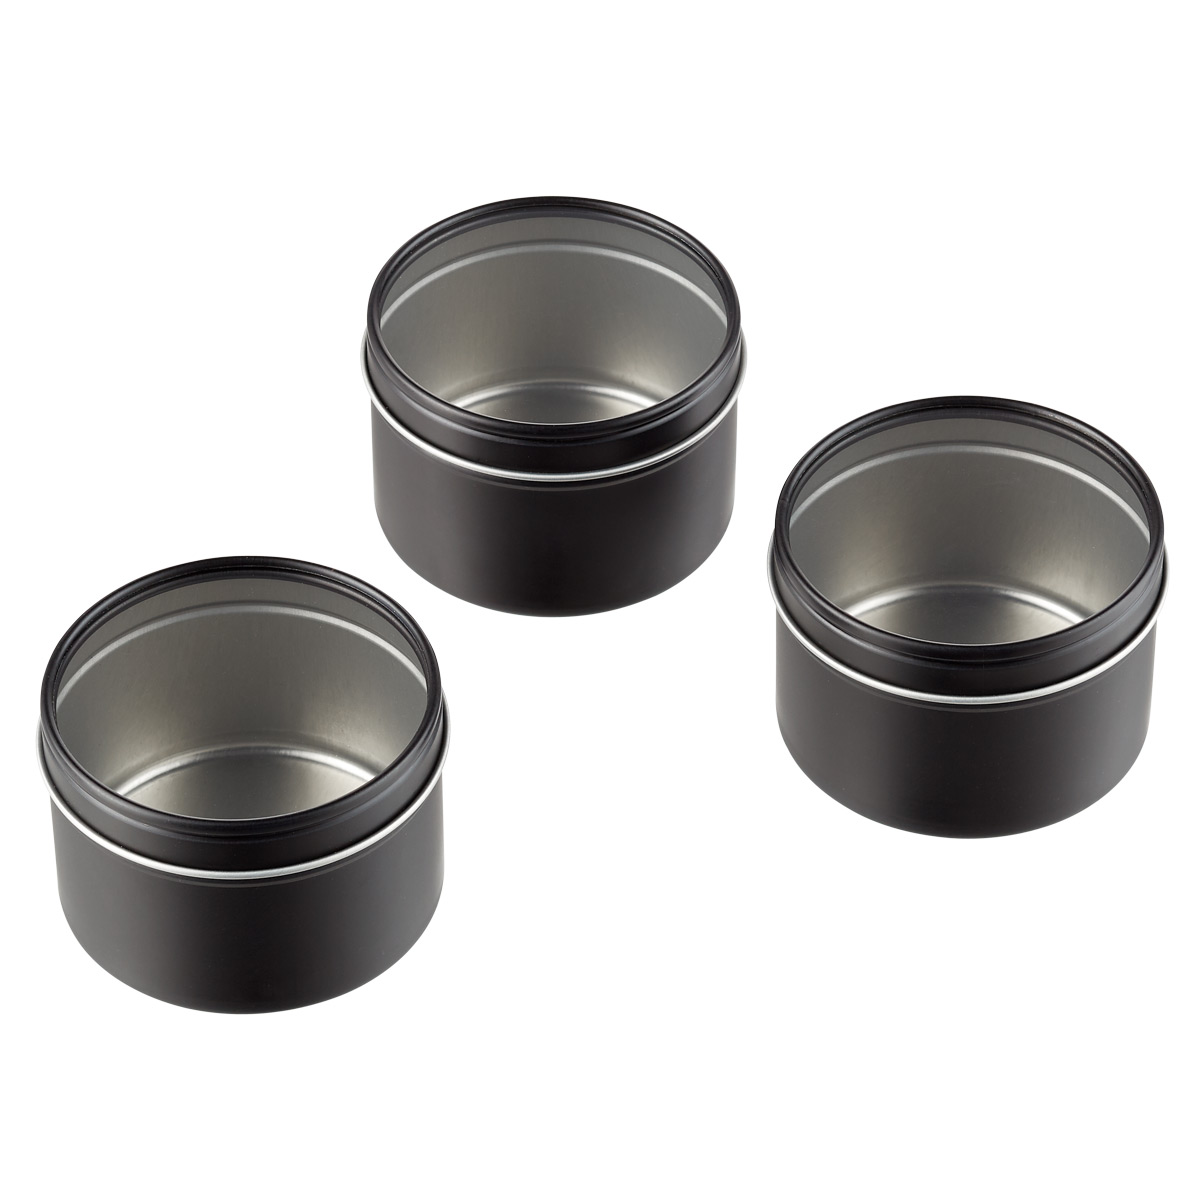 https://www.containerstore.com/catalogimages/382921/10079995-round-magnetic-tin-bins-wit.jpg